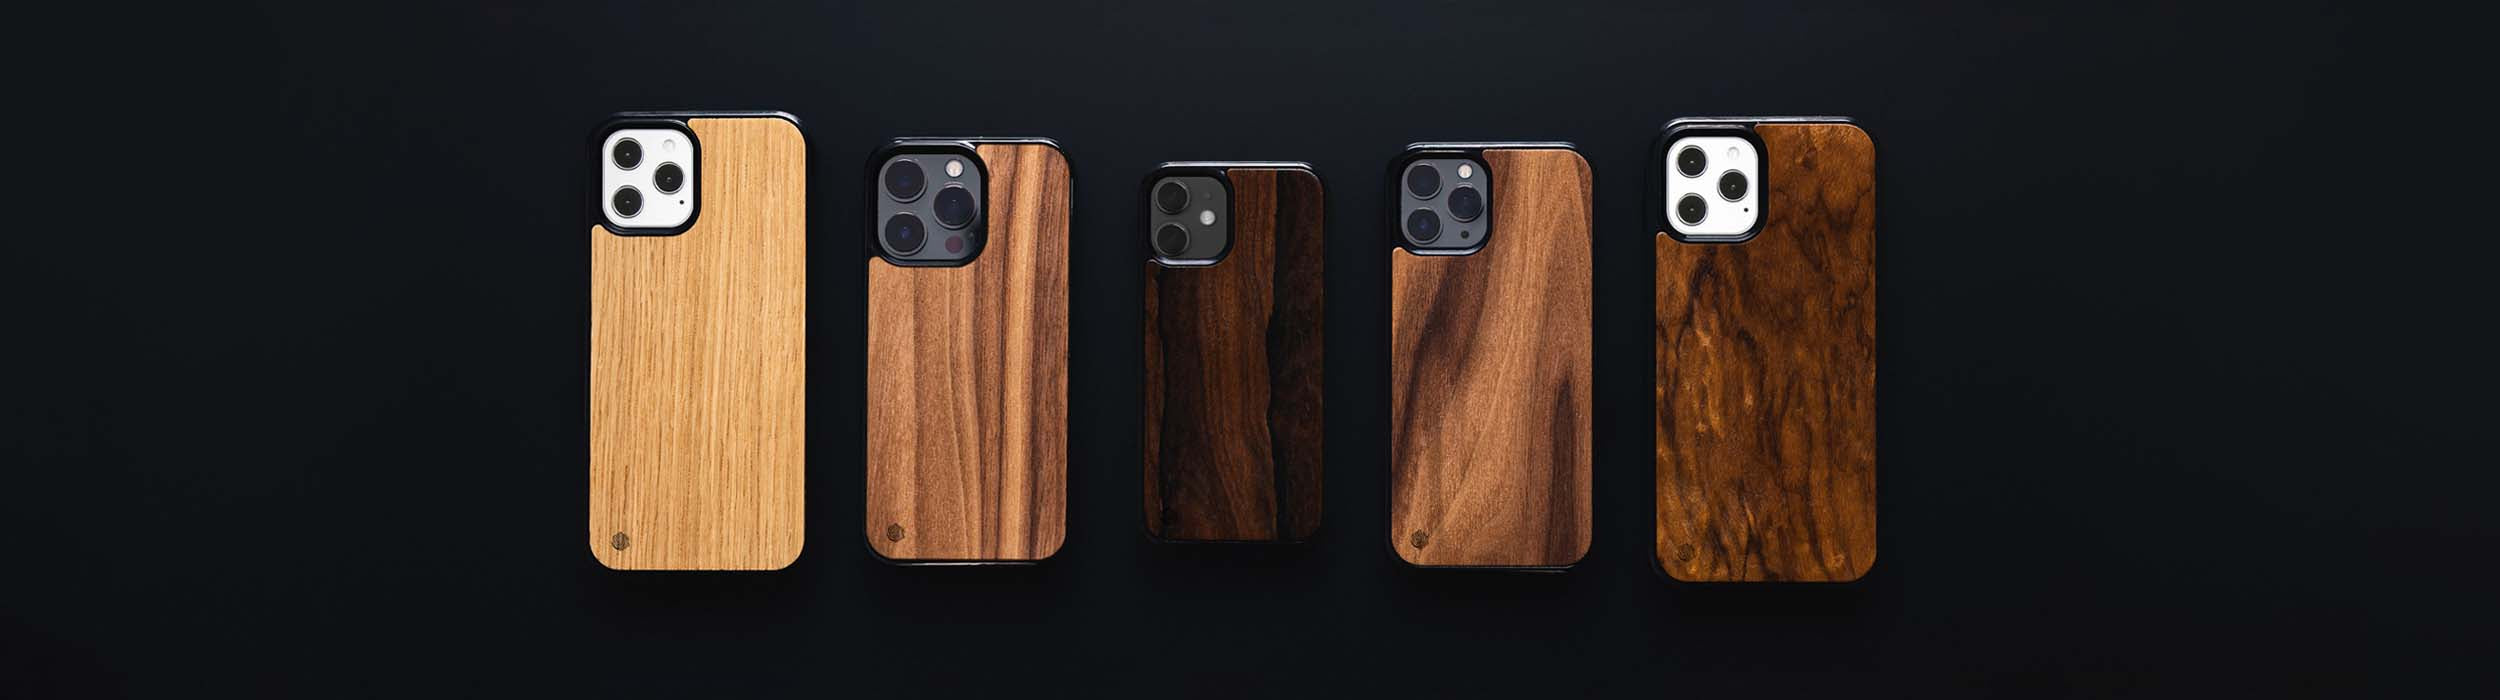 Apple iPhone Wooden Phone Cases